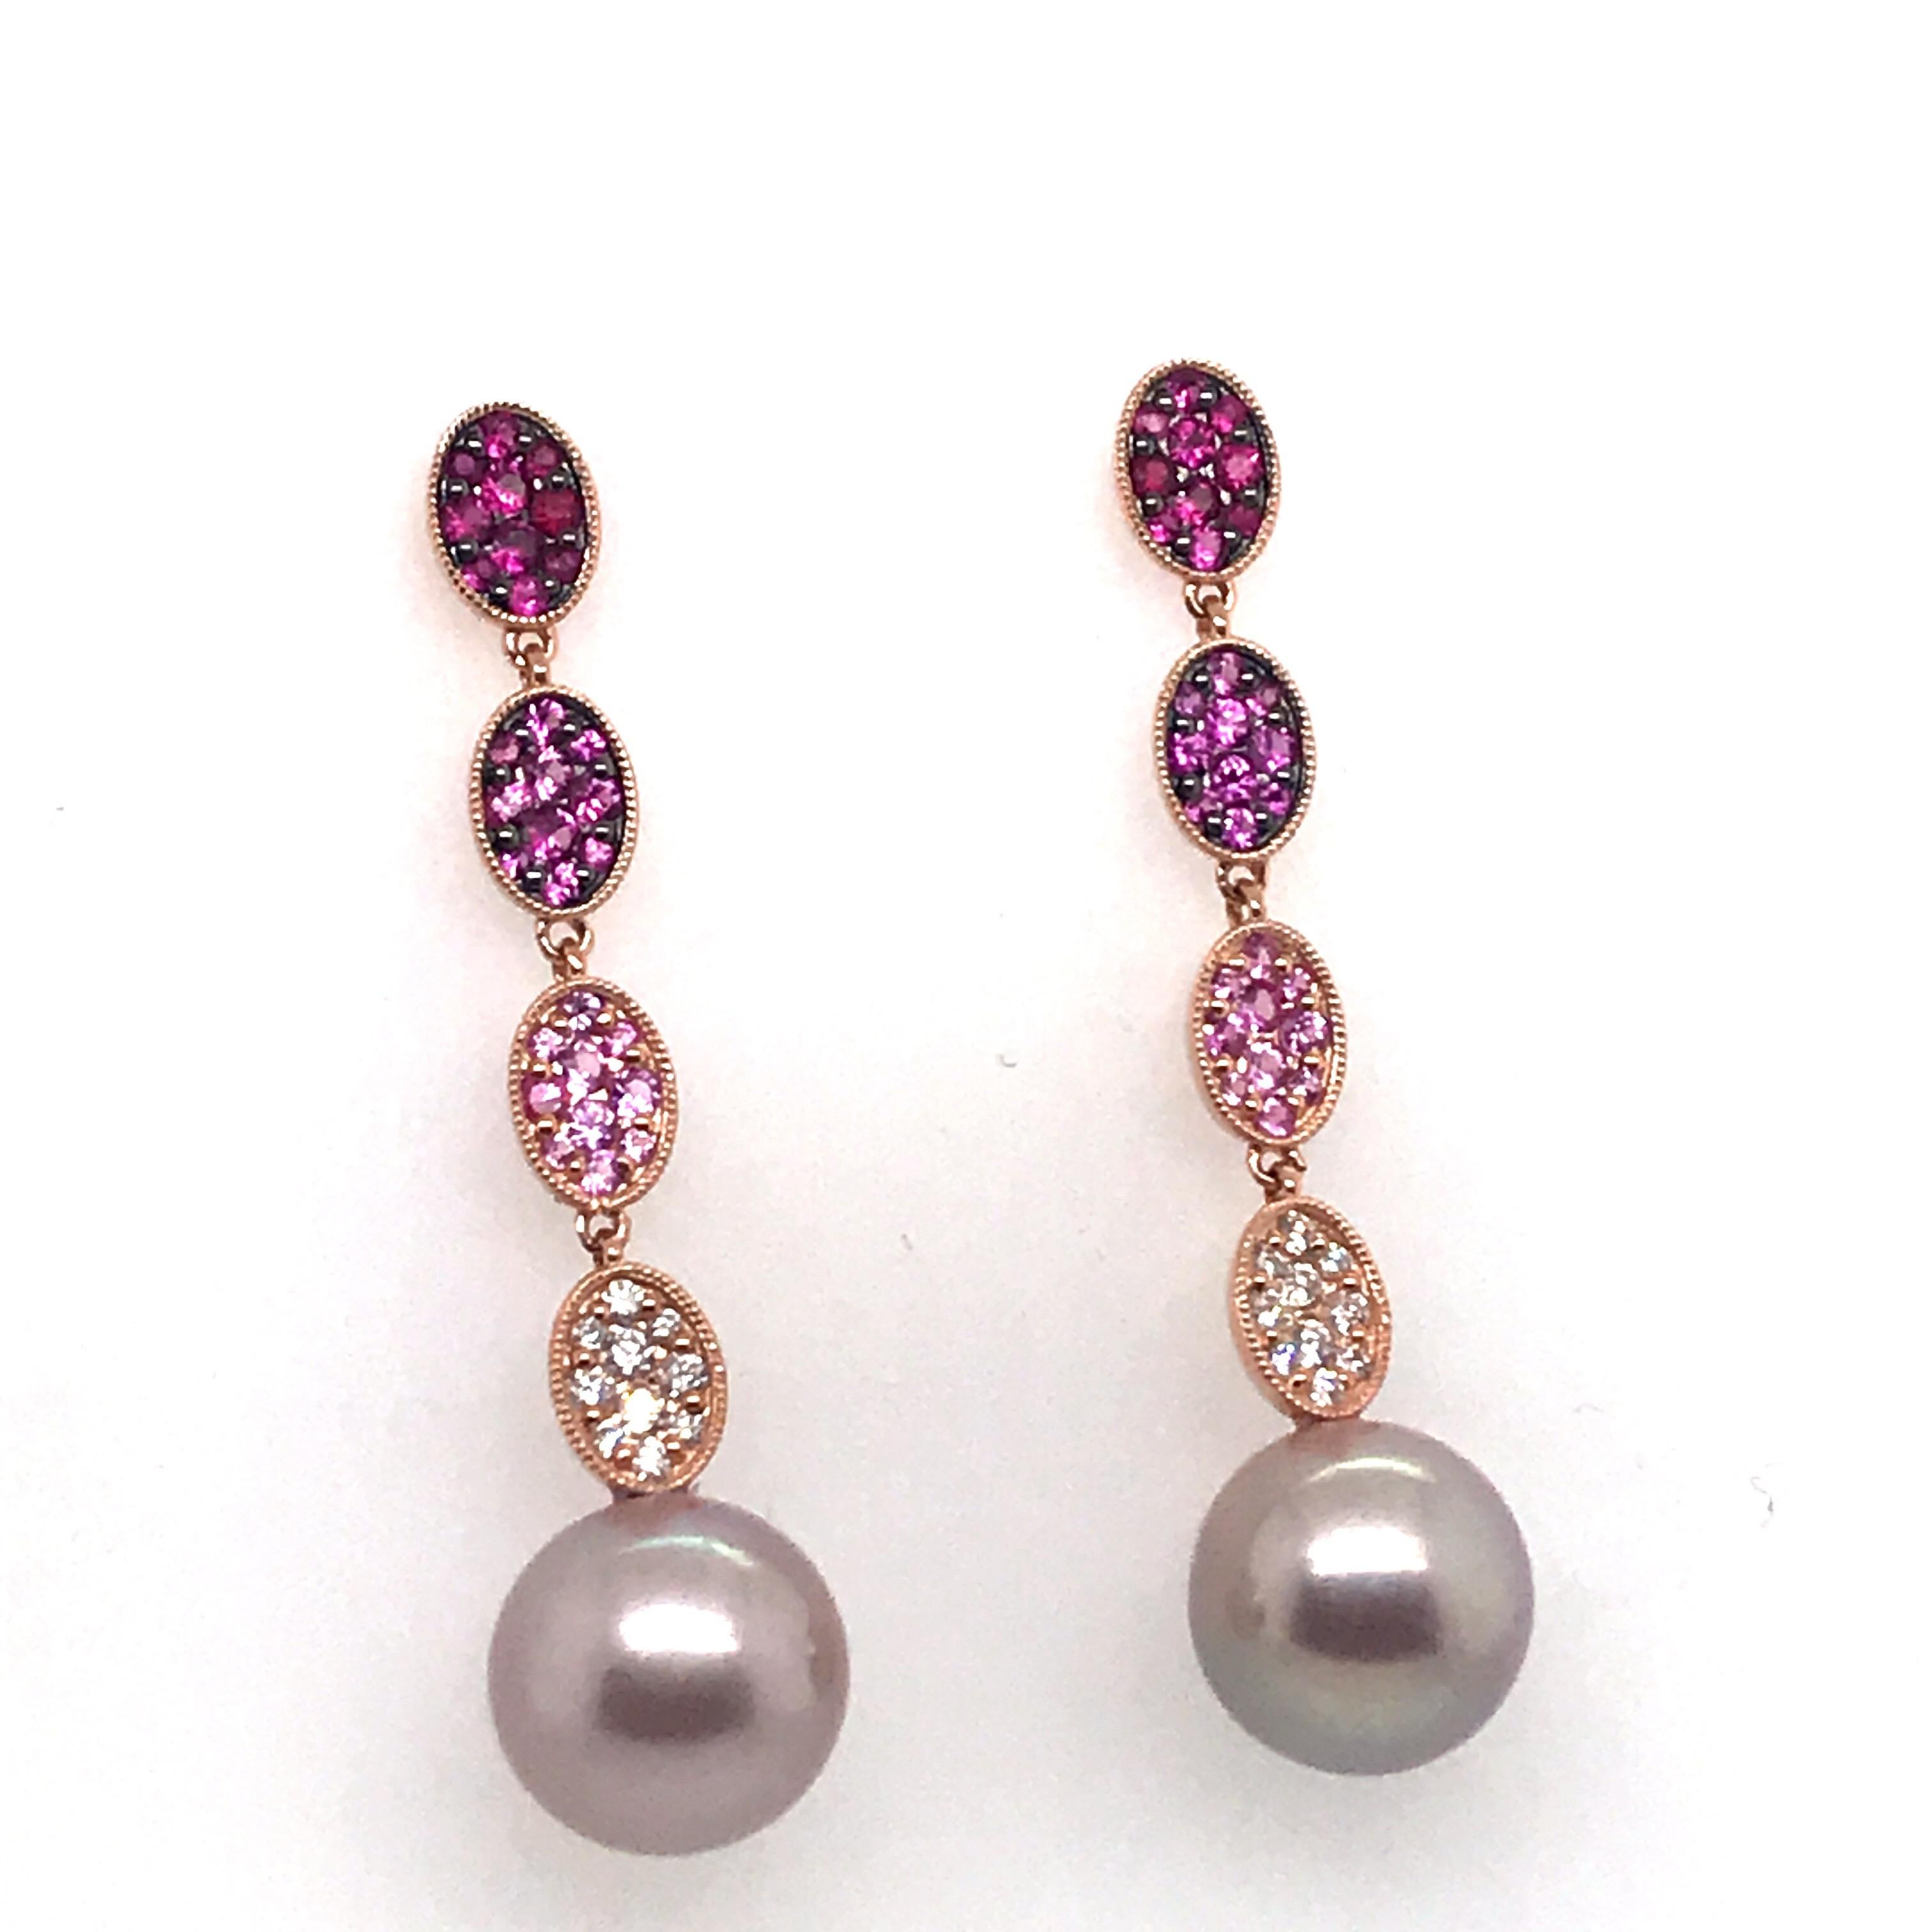 18K White gold drop earrings featuring pink sapphire ombreesapphires weighing 1.32 carats, 20 round brilliants weighing 0.34 carats and two South Sea Pearls measuring 11-12mm